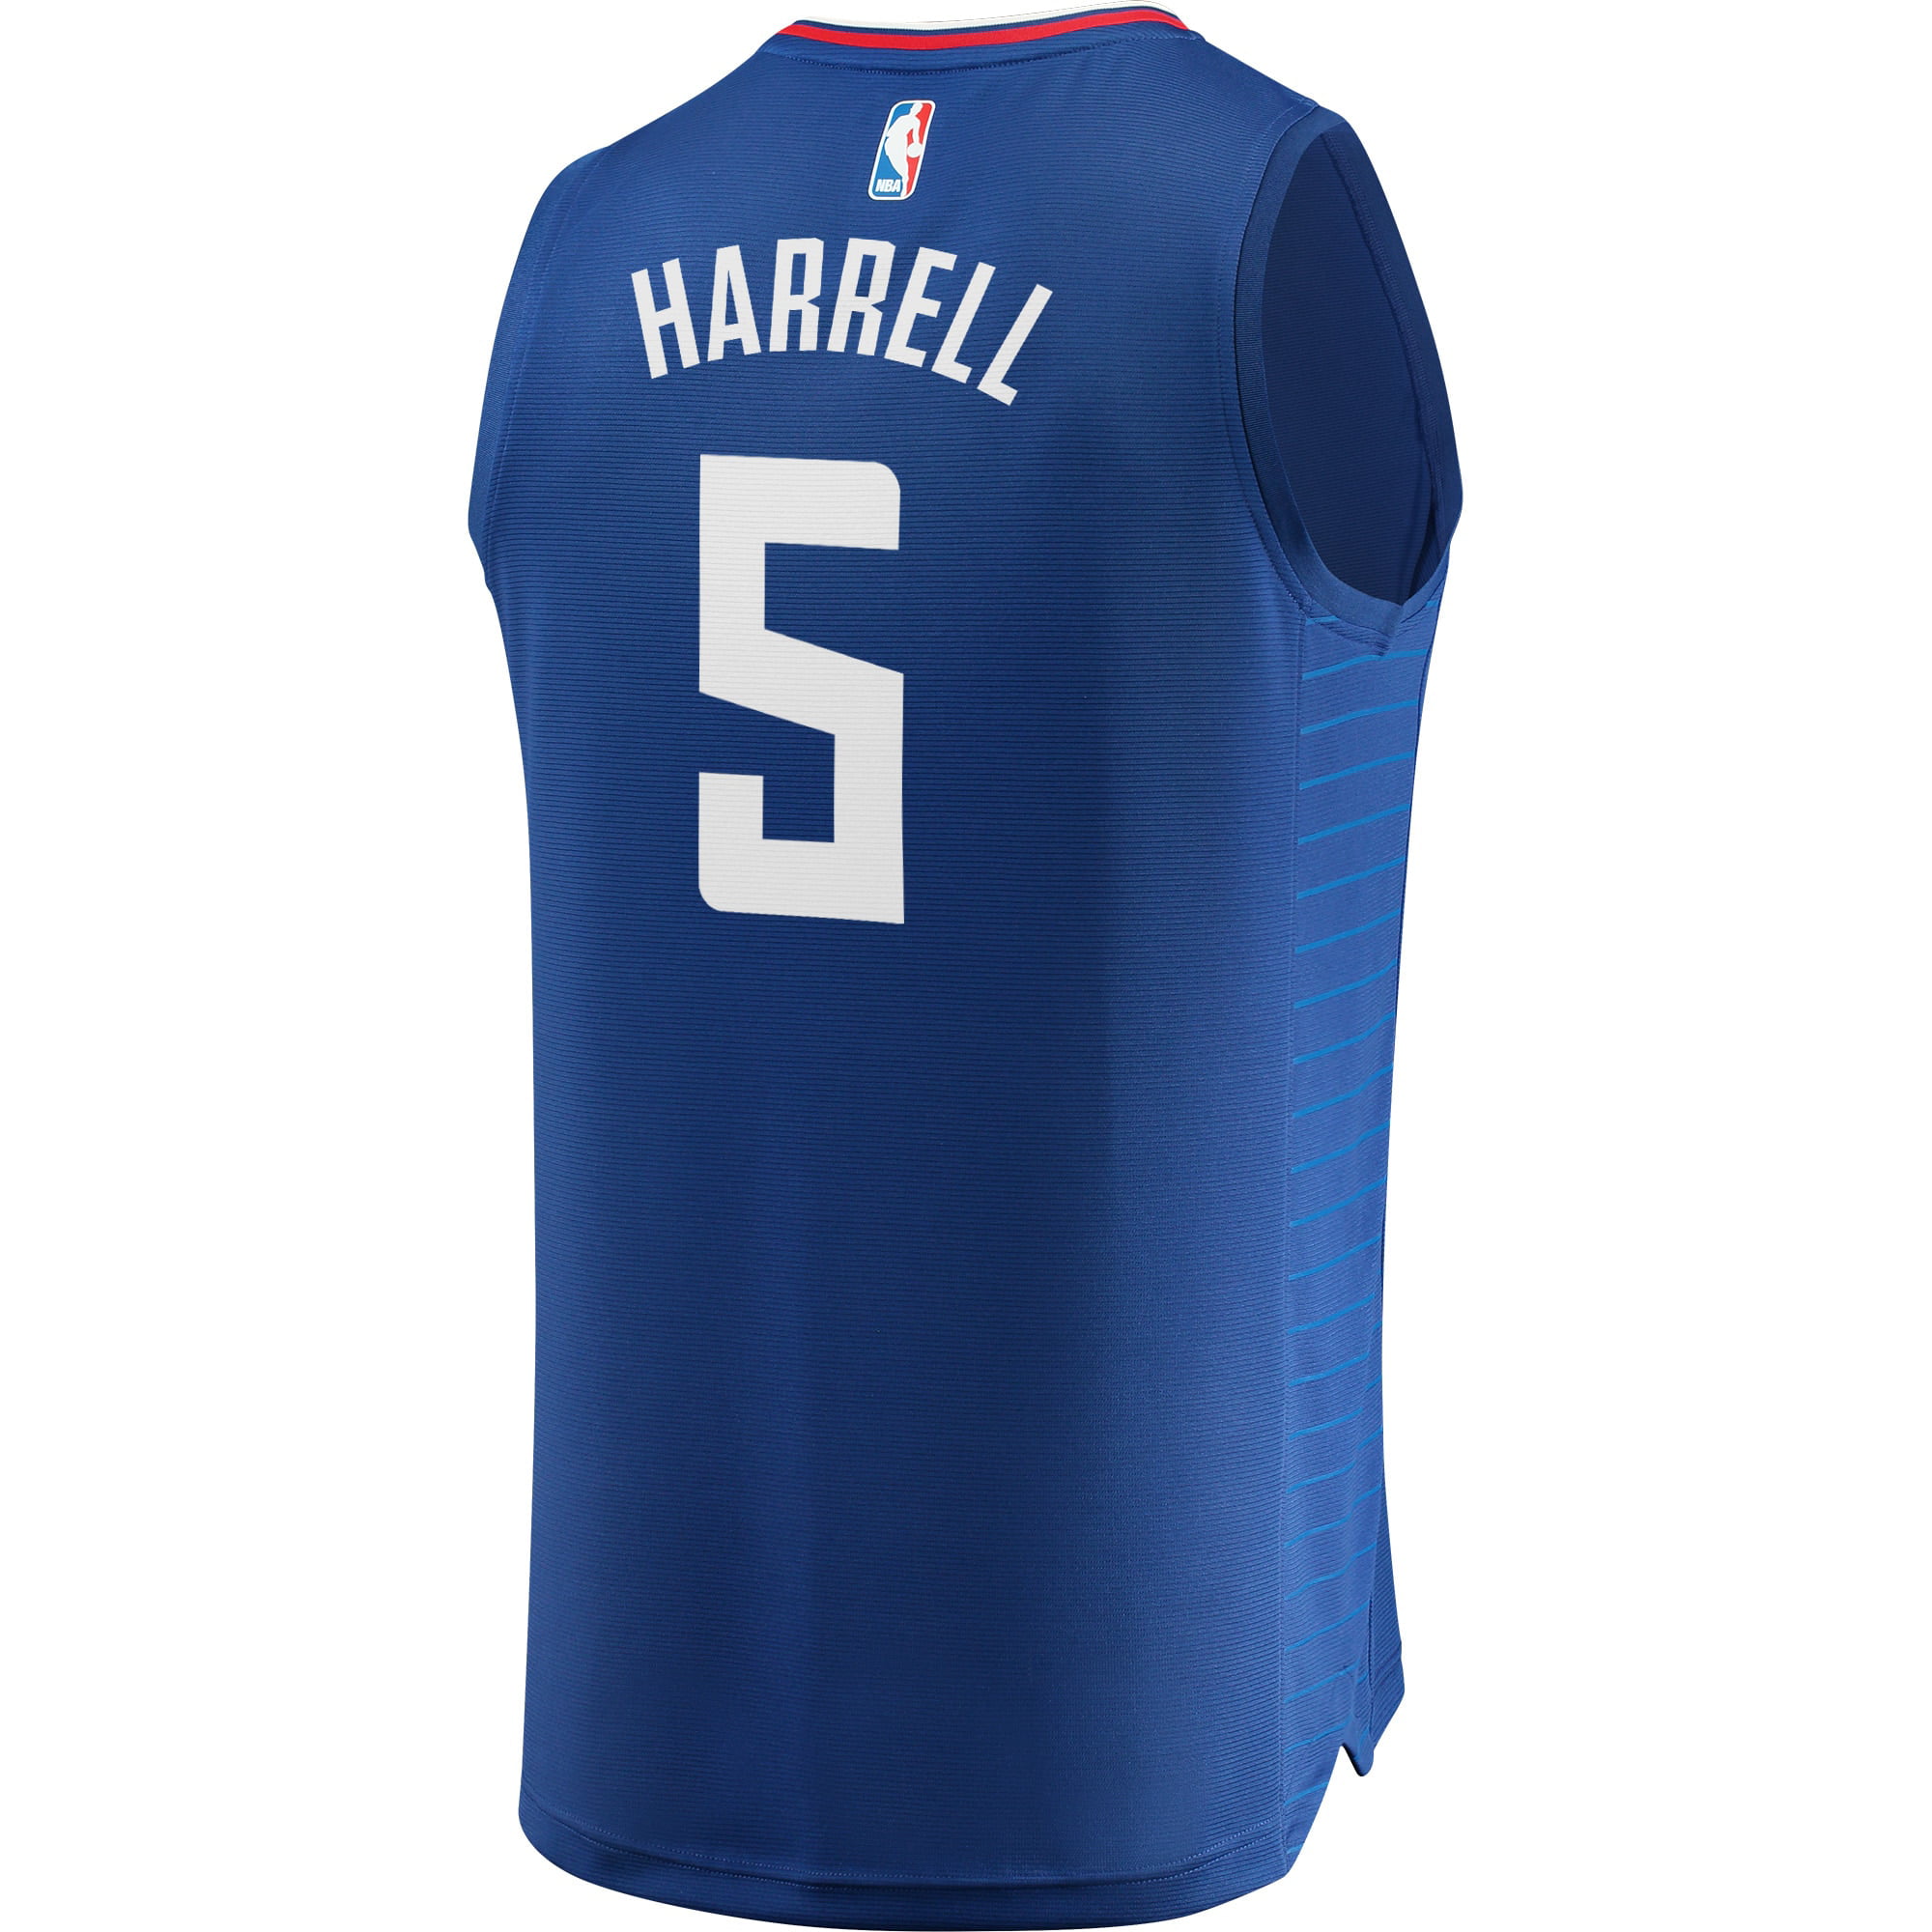 harrell clippers jersey